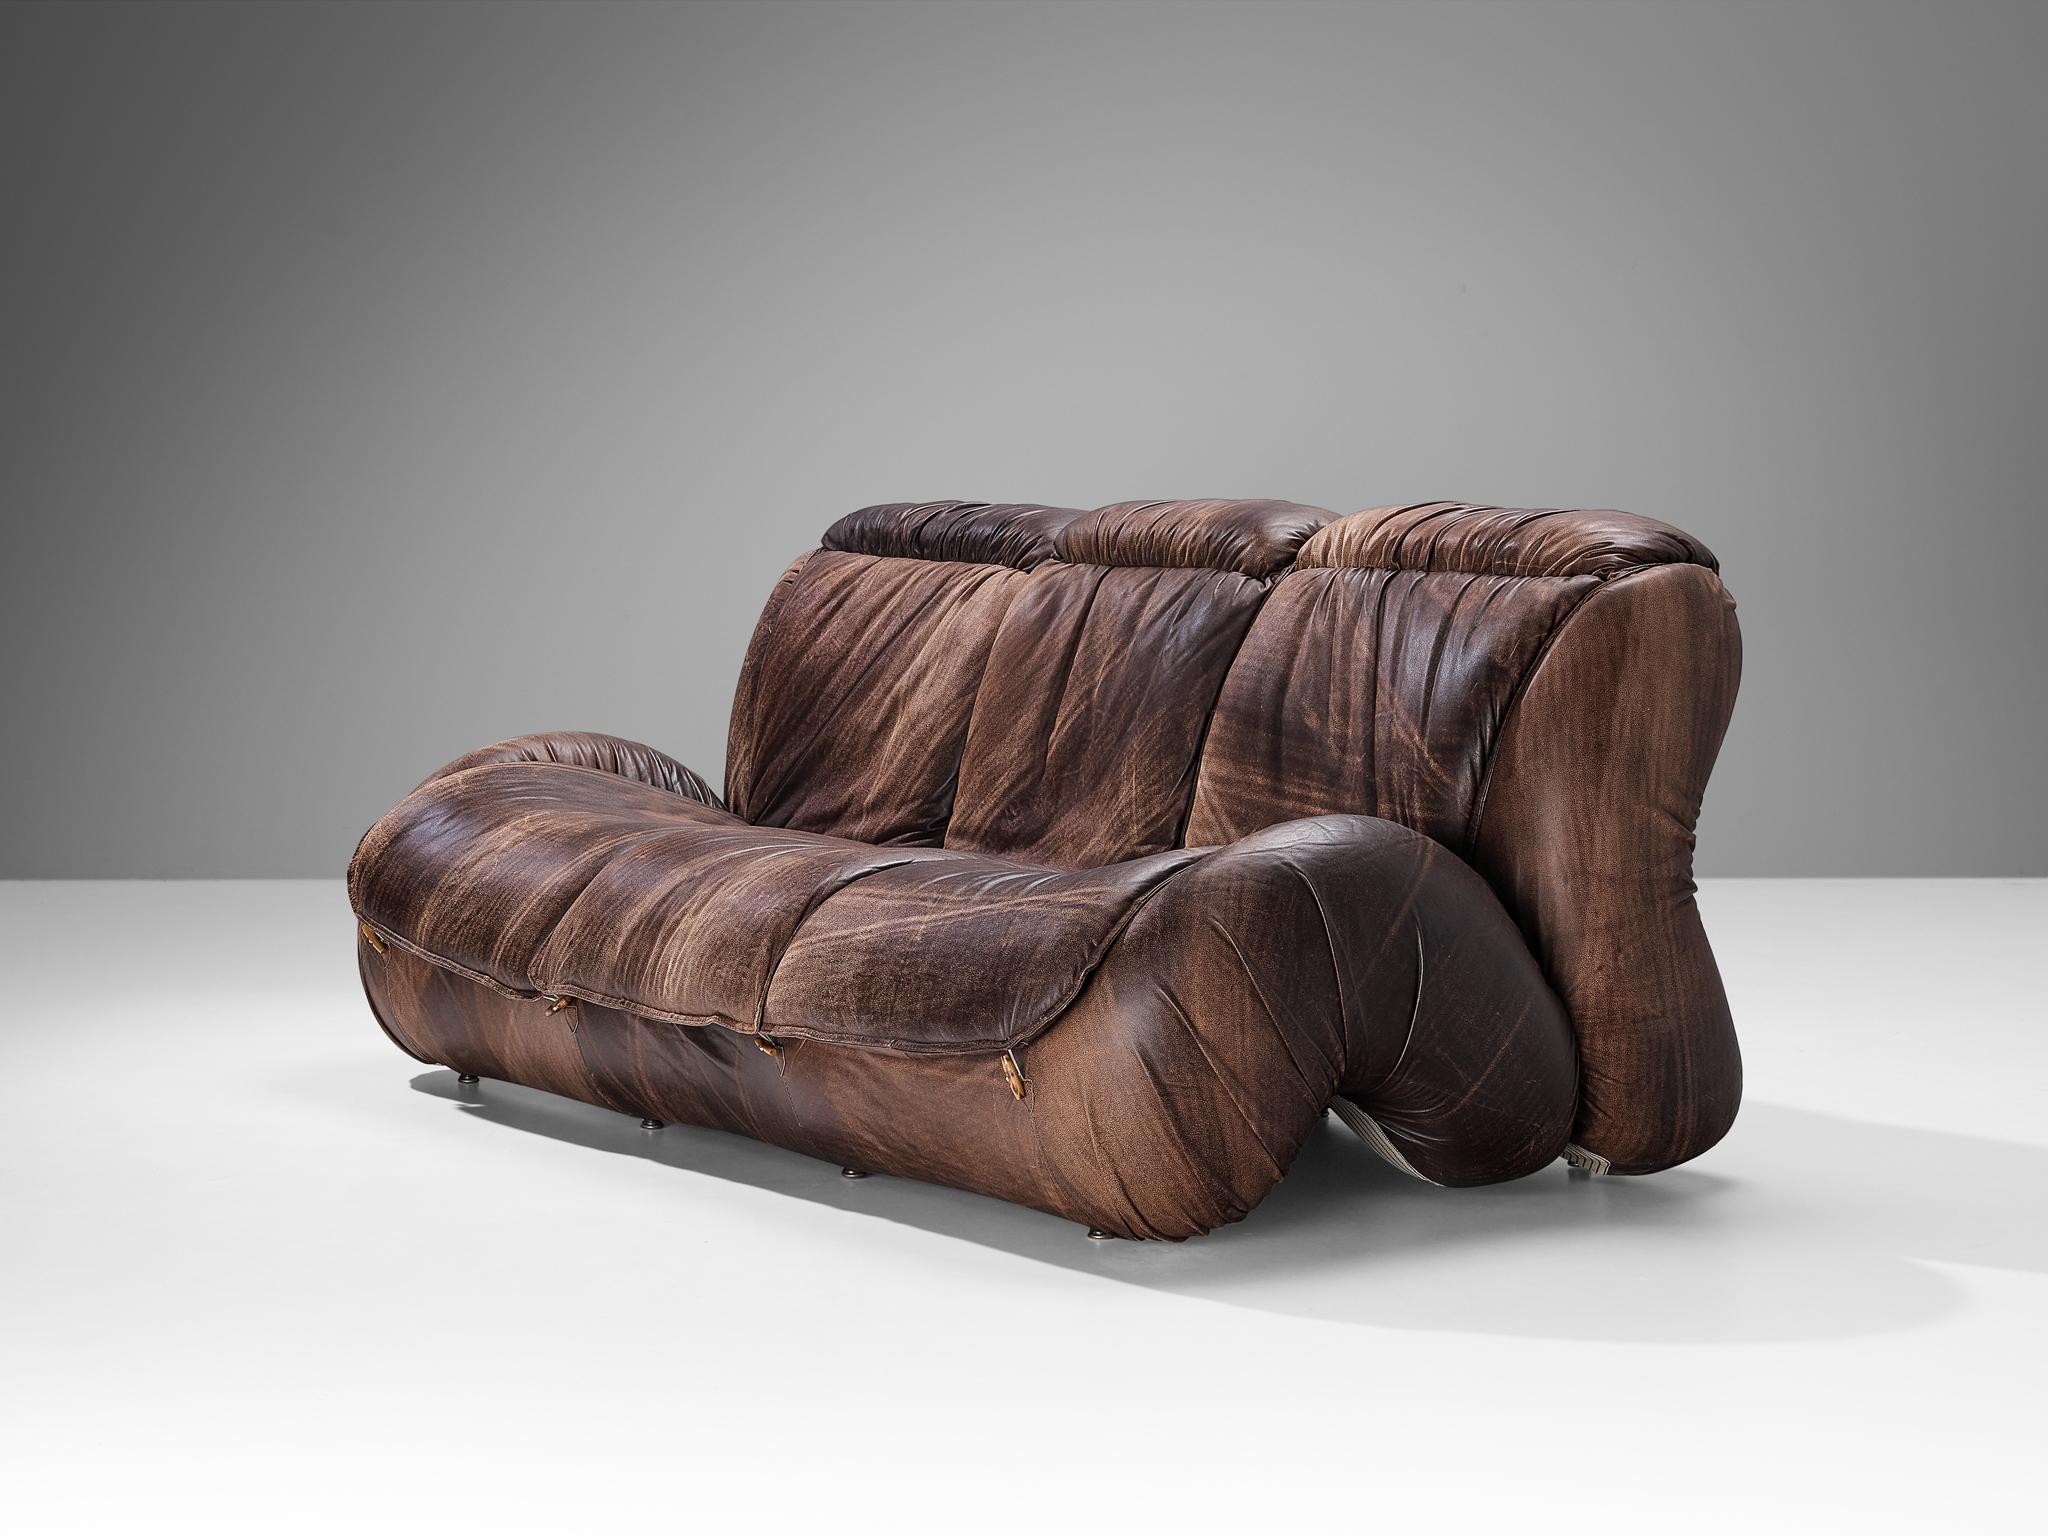 Sofa, beech, leather, Italy, 1970s. 

This postmodern Italian sofa will surely grab the viewer's attention. The construction is based on enlarged biomorphic shapes with curvaceous lines and bold shapes dominating the layout. The top layer of the